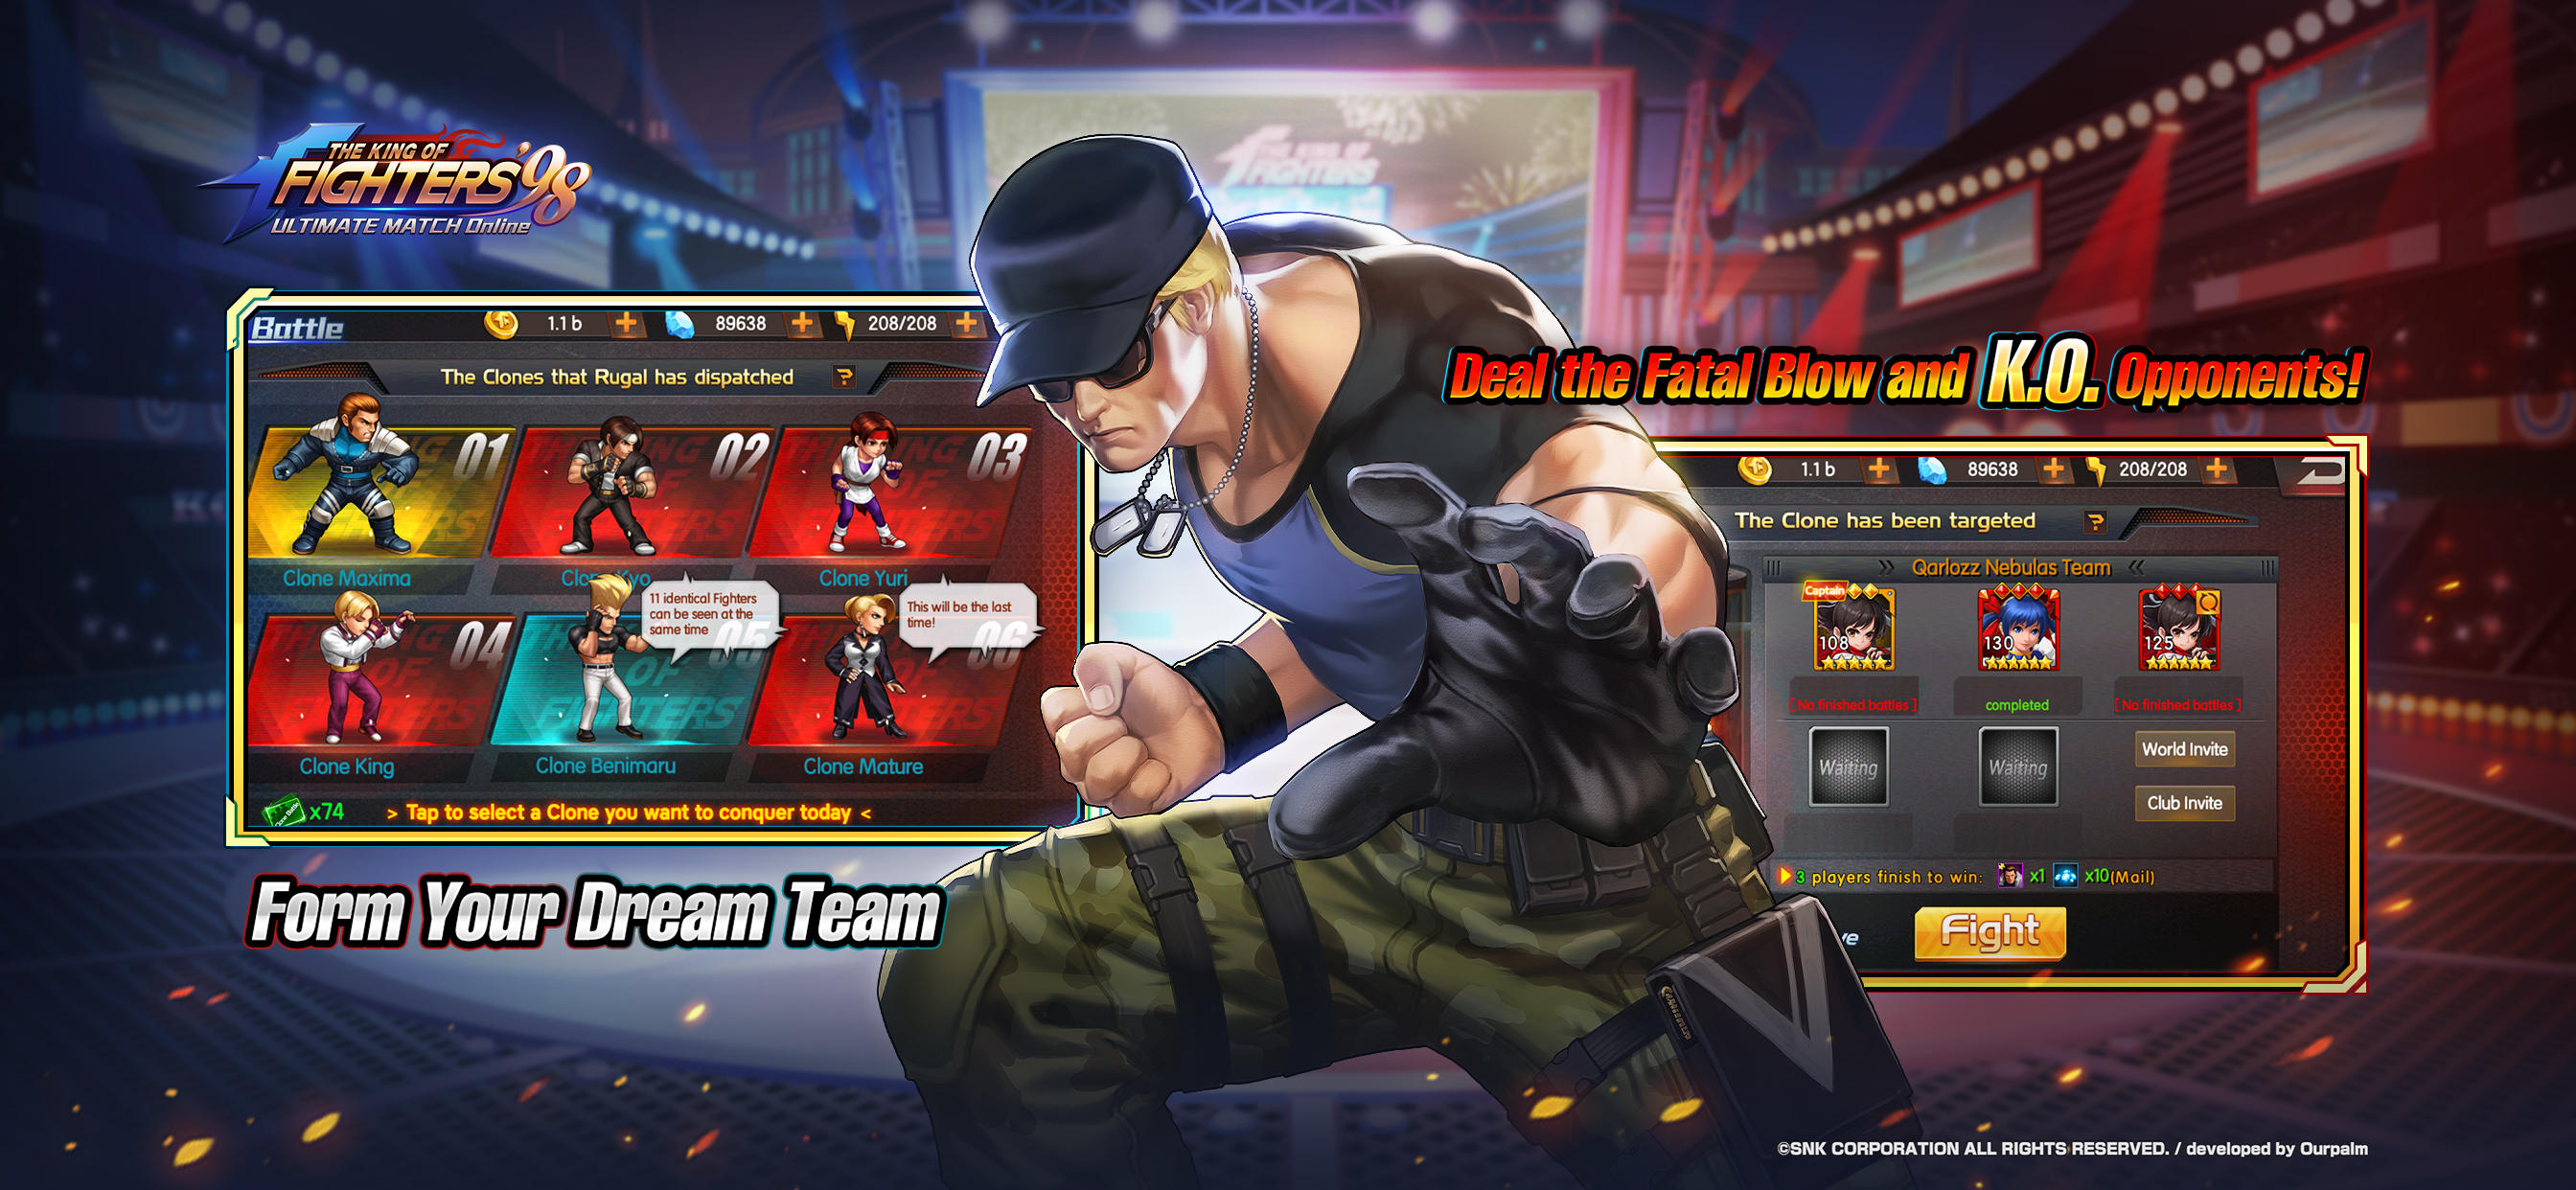 THE KING OF FIGHTERS '98 v1.6 APK (Full Game) Download